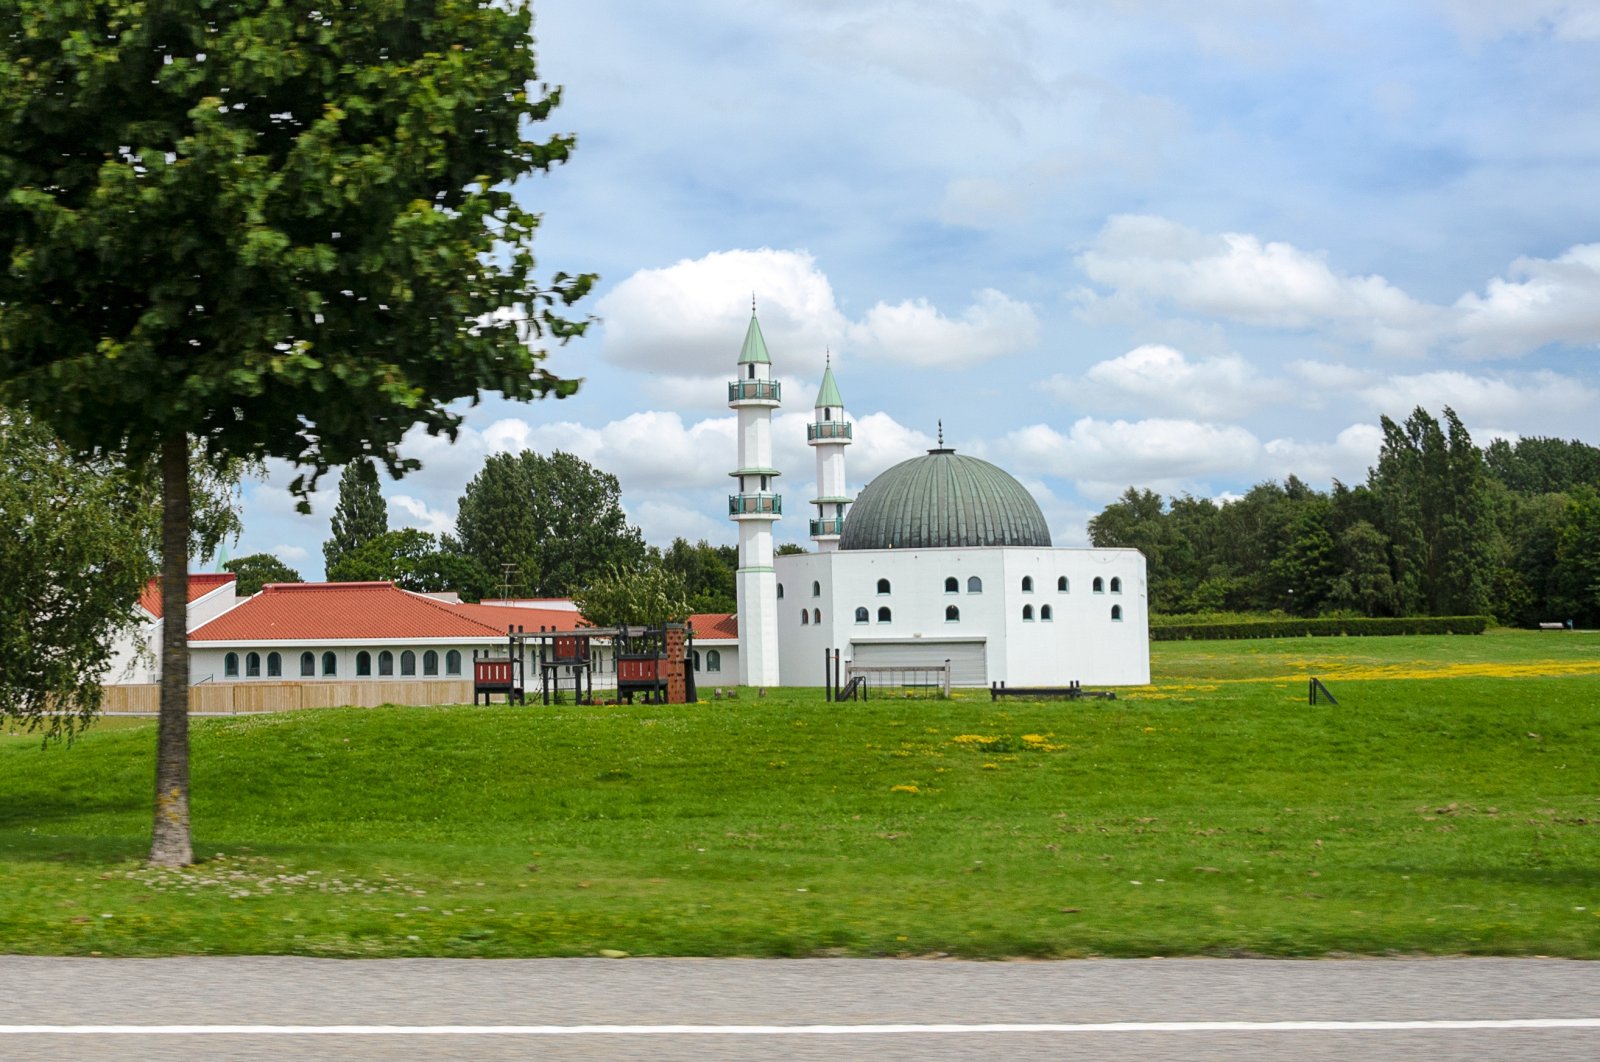 Islamic Center in Malmo, the mosque and the school located in Malmo, Sweden, July 22, 2017. (Shutterstock File Photo)